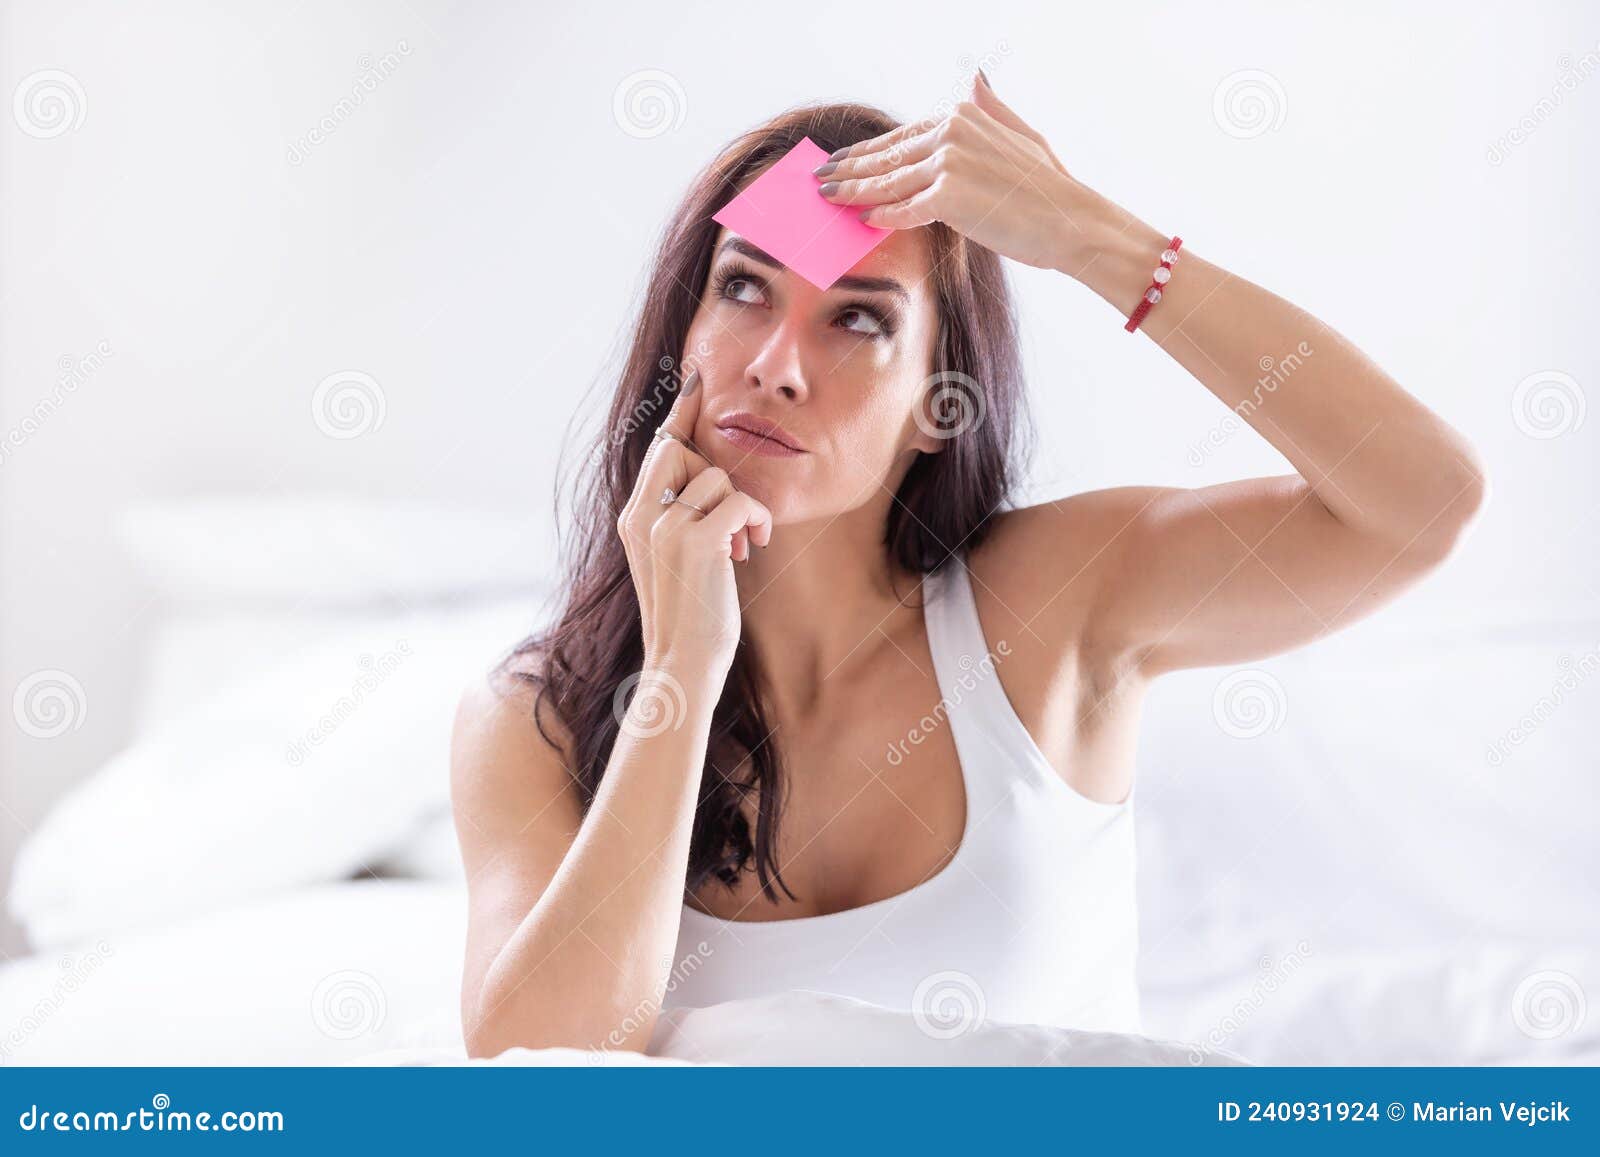 woman forgetting something puts a pink post-it on her forehead, thinking